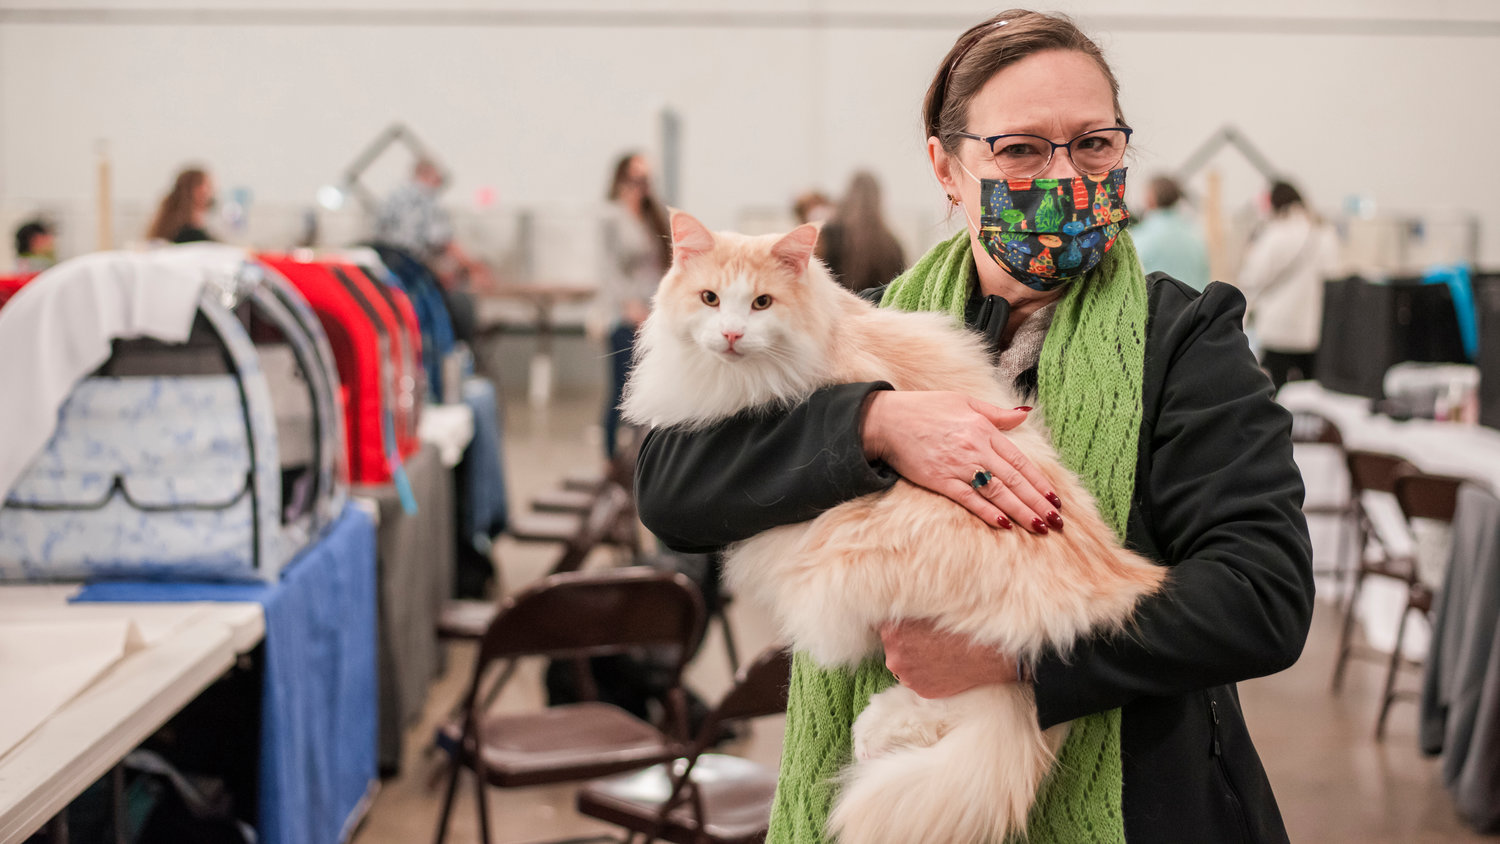 Esther Edgren carries Medford through the Blue Pavilion at the Southwest Washington Fairgrounds in Chehalis on Sunday during Medford’s last cat show before retirement.